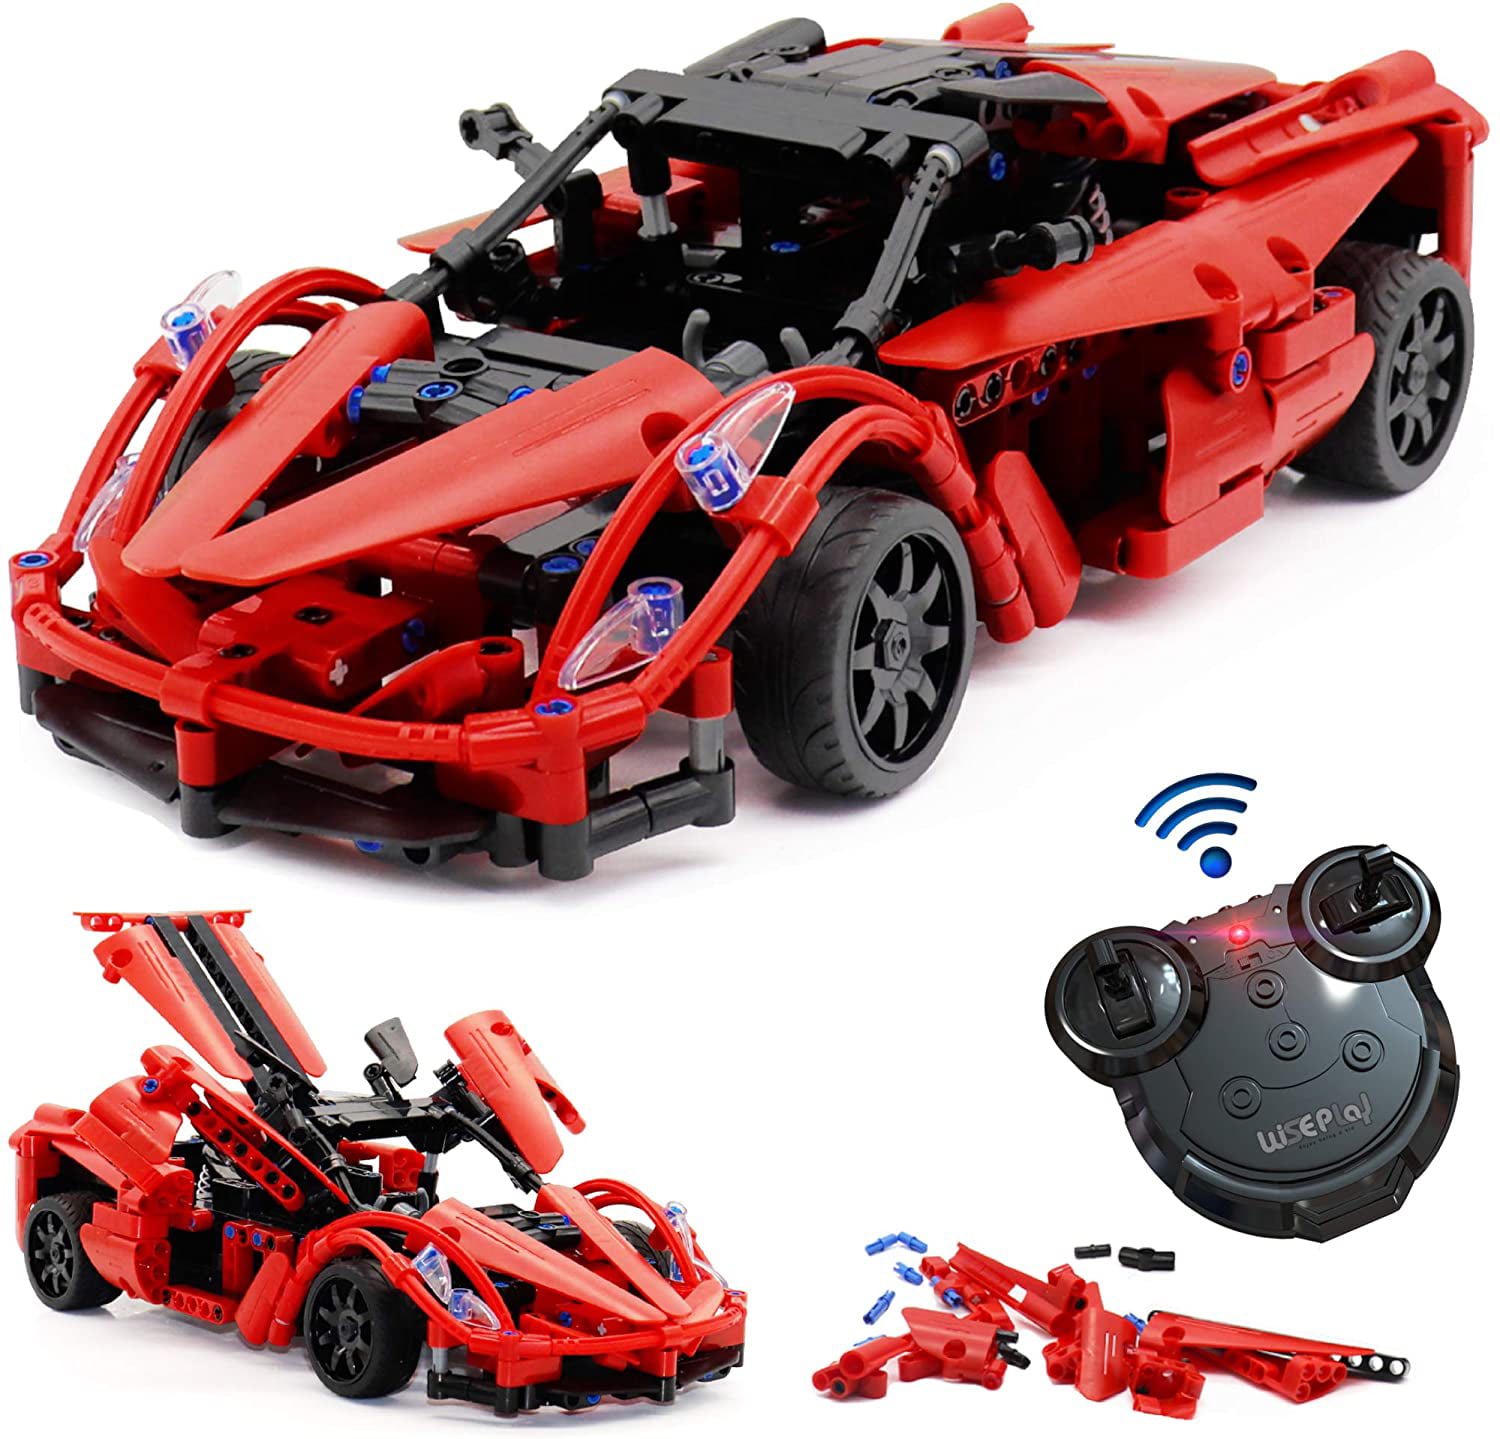 STEM Toys RC Car Build Kit Educational Octopbrik Remote Control Car Building Toy for Age 6 7 8 9 10 11 12+ Learning Birthday Gift for Kids 325PCS 